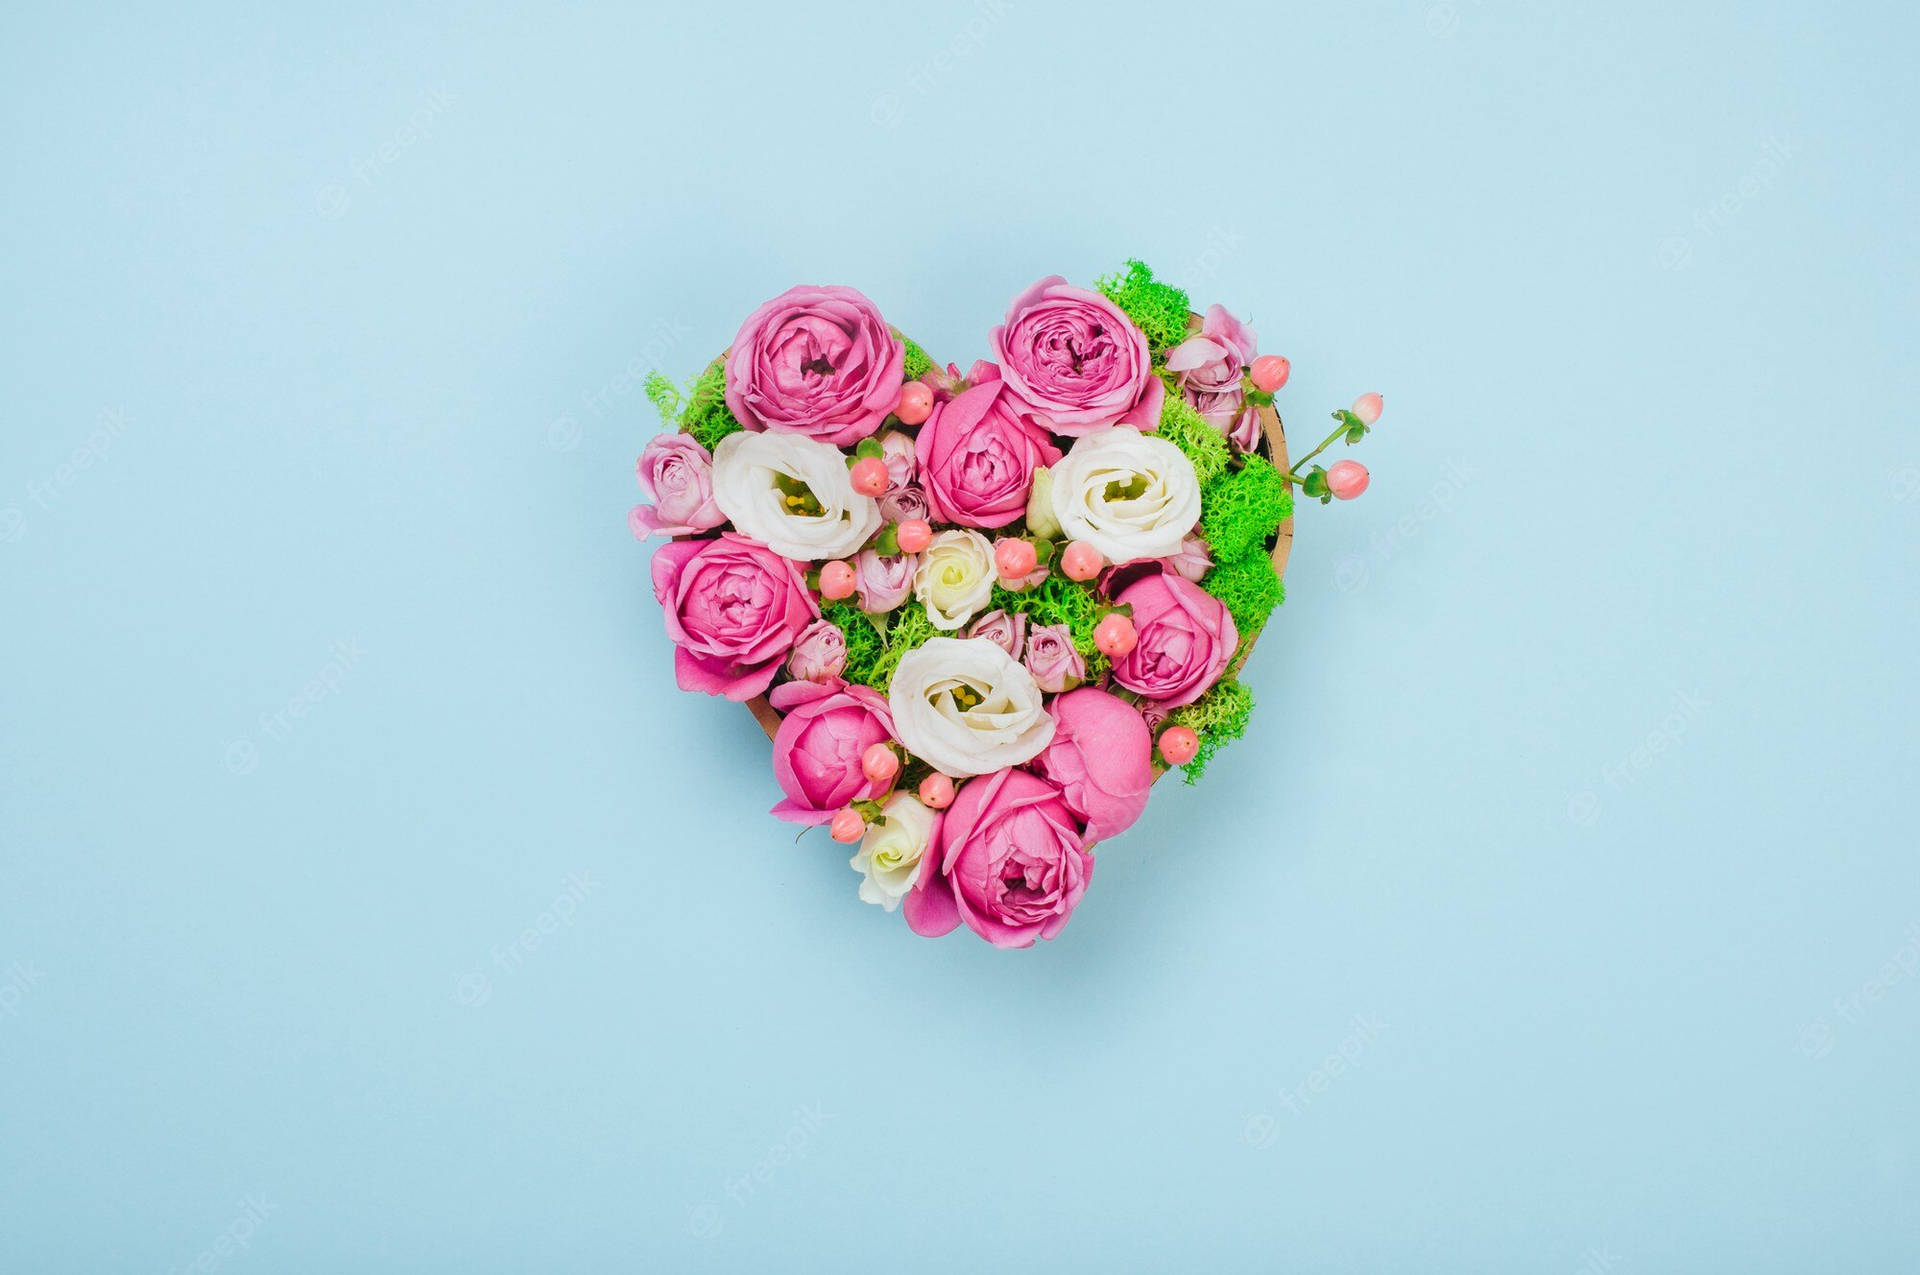 Flower Heart With Pink And White Roses Wallpaper